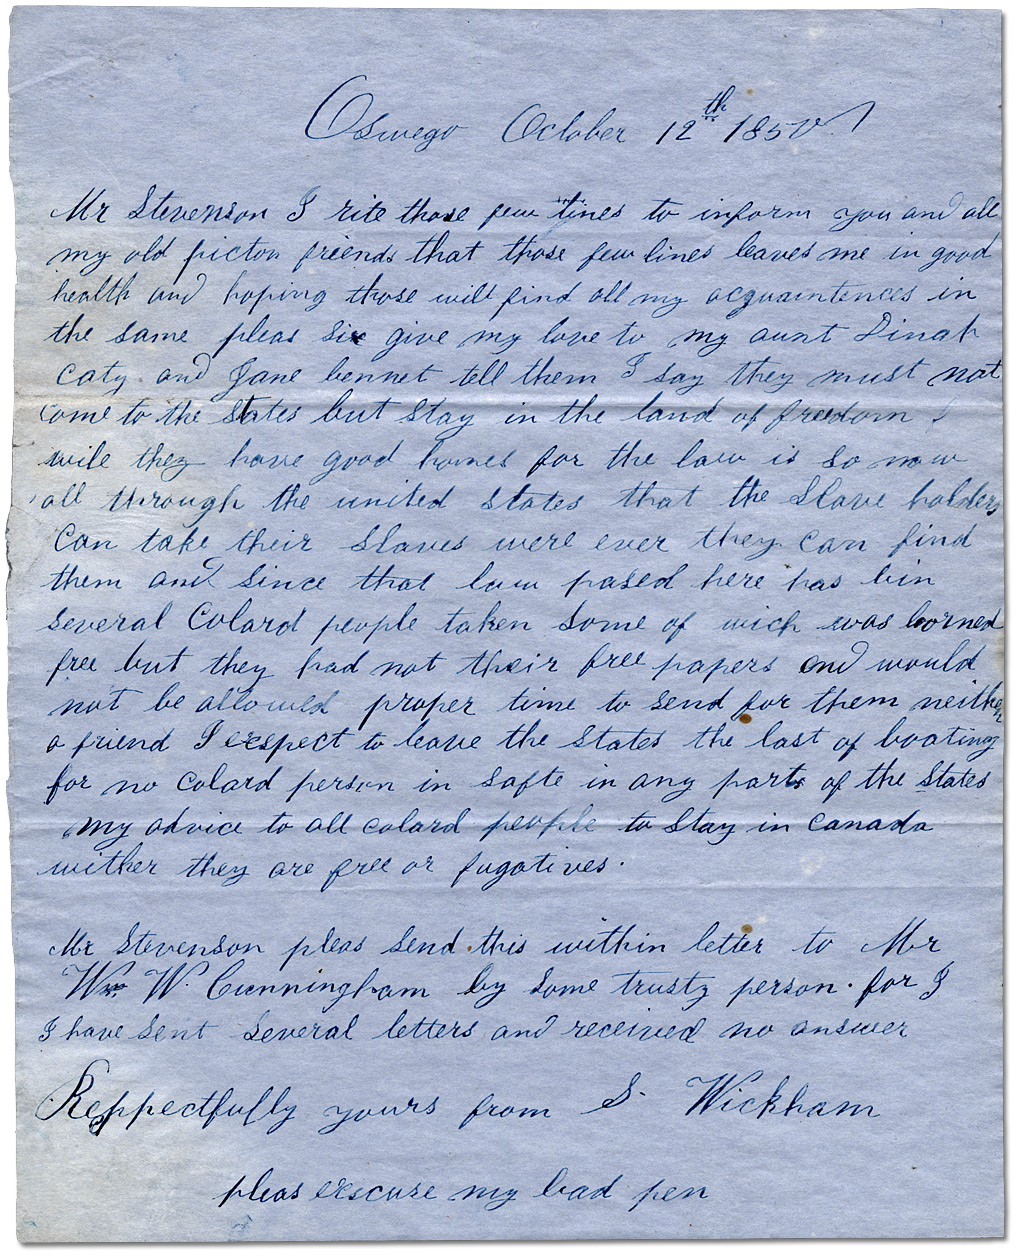 Letter dated Oct. 12, 1850 from S. Wickham warning of slave-catchers in the United States